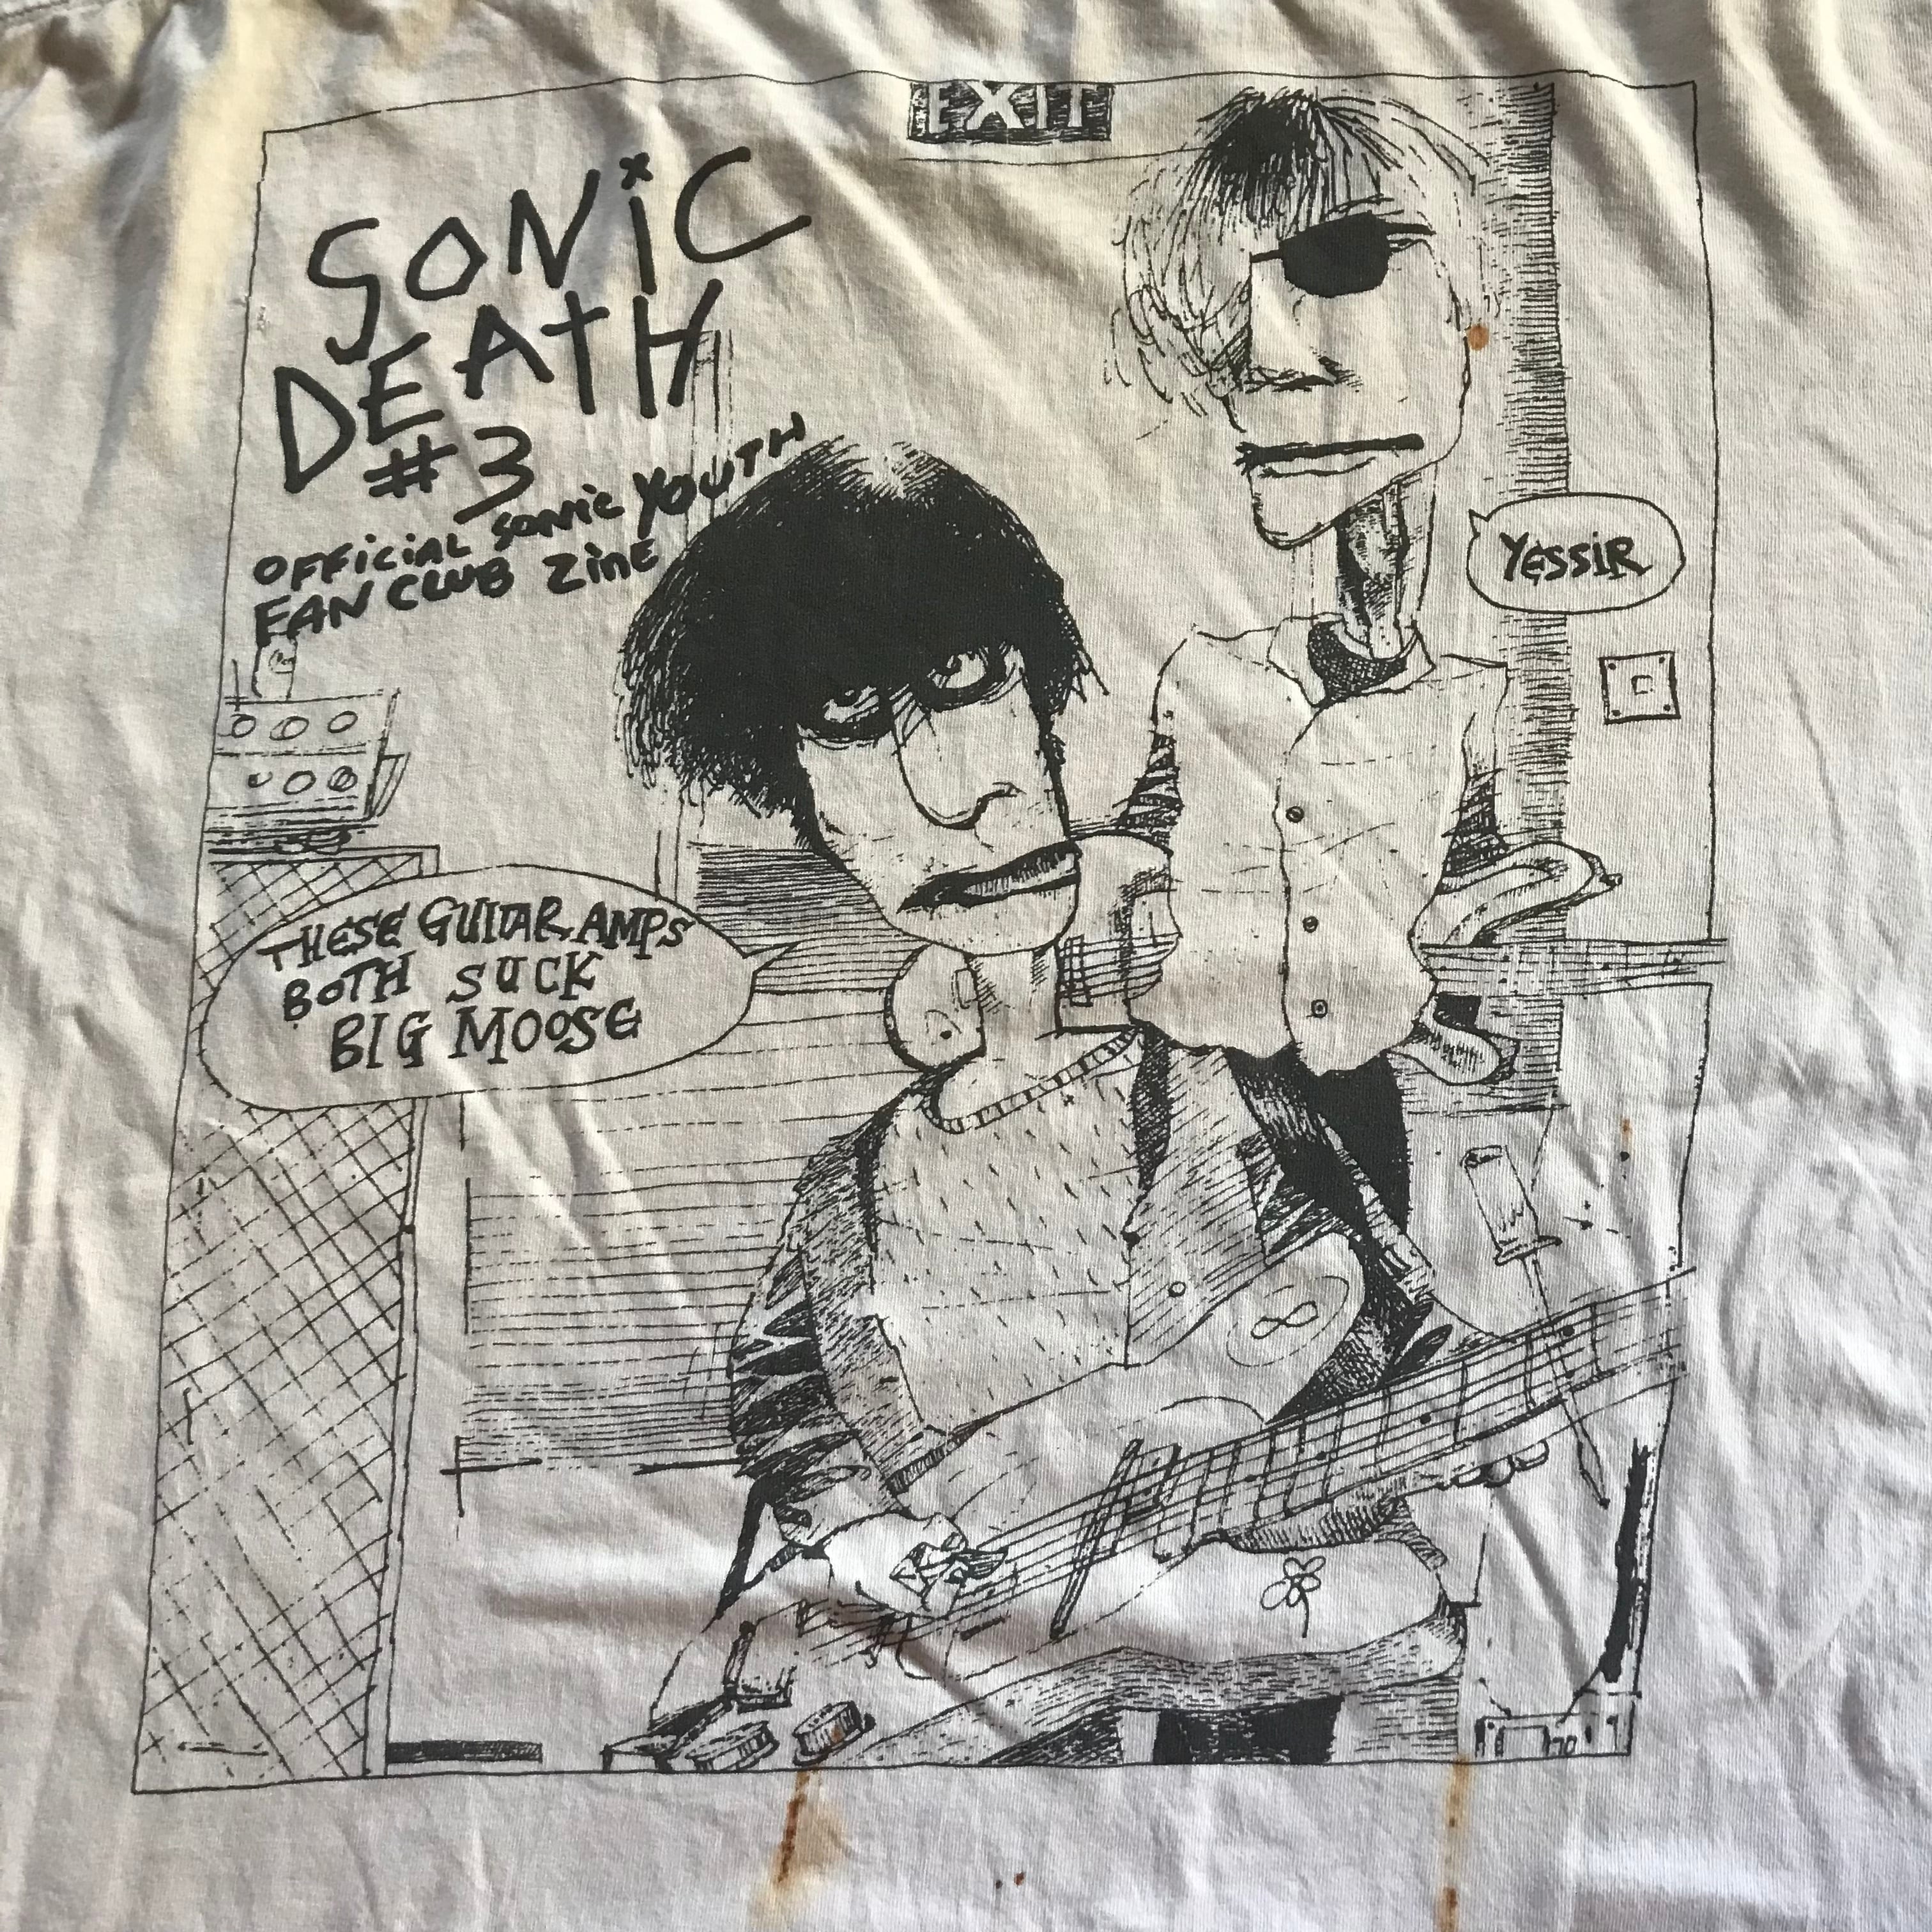 90's SONIC YOUTH SONIC DEATH T-SHIRT USED | LIGHT CAVE